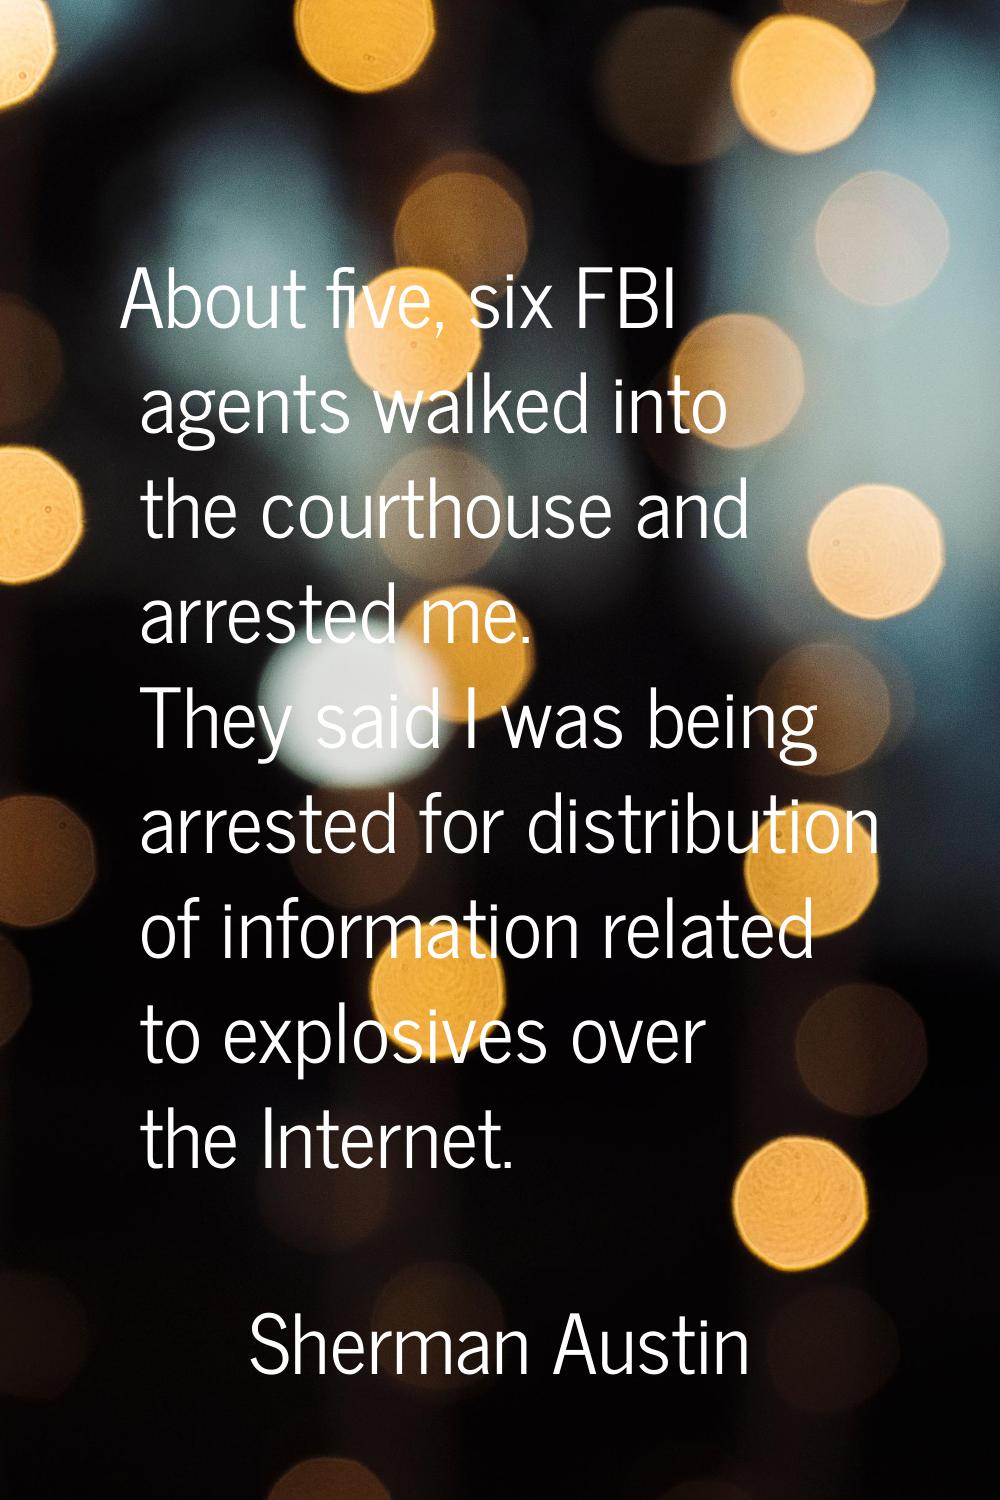 About five, six FBI agents walked into the courthouse and arrested me. They said I was being arrest